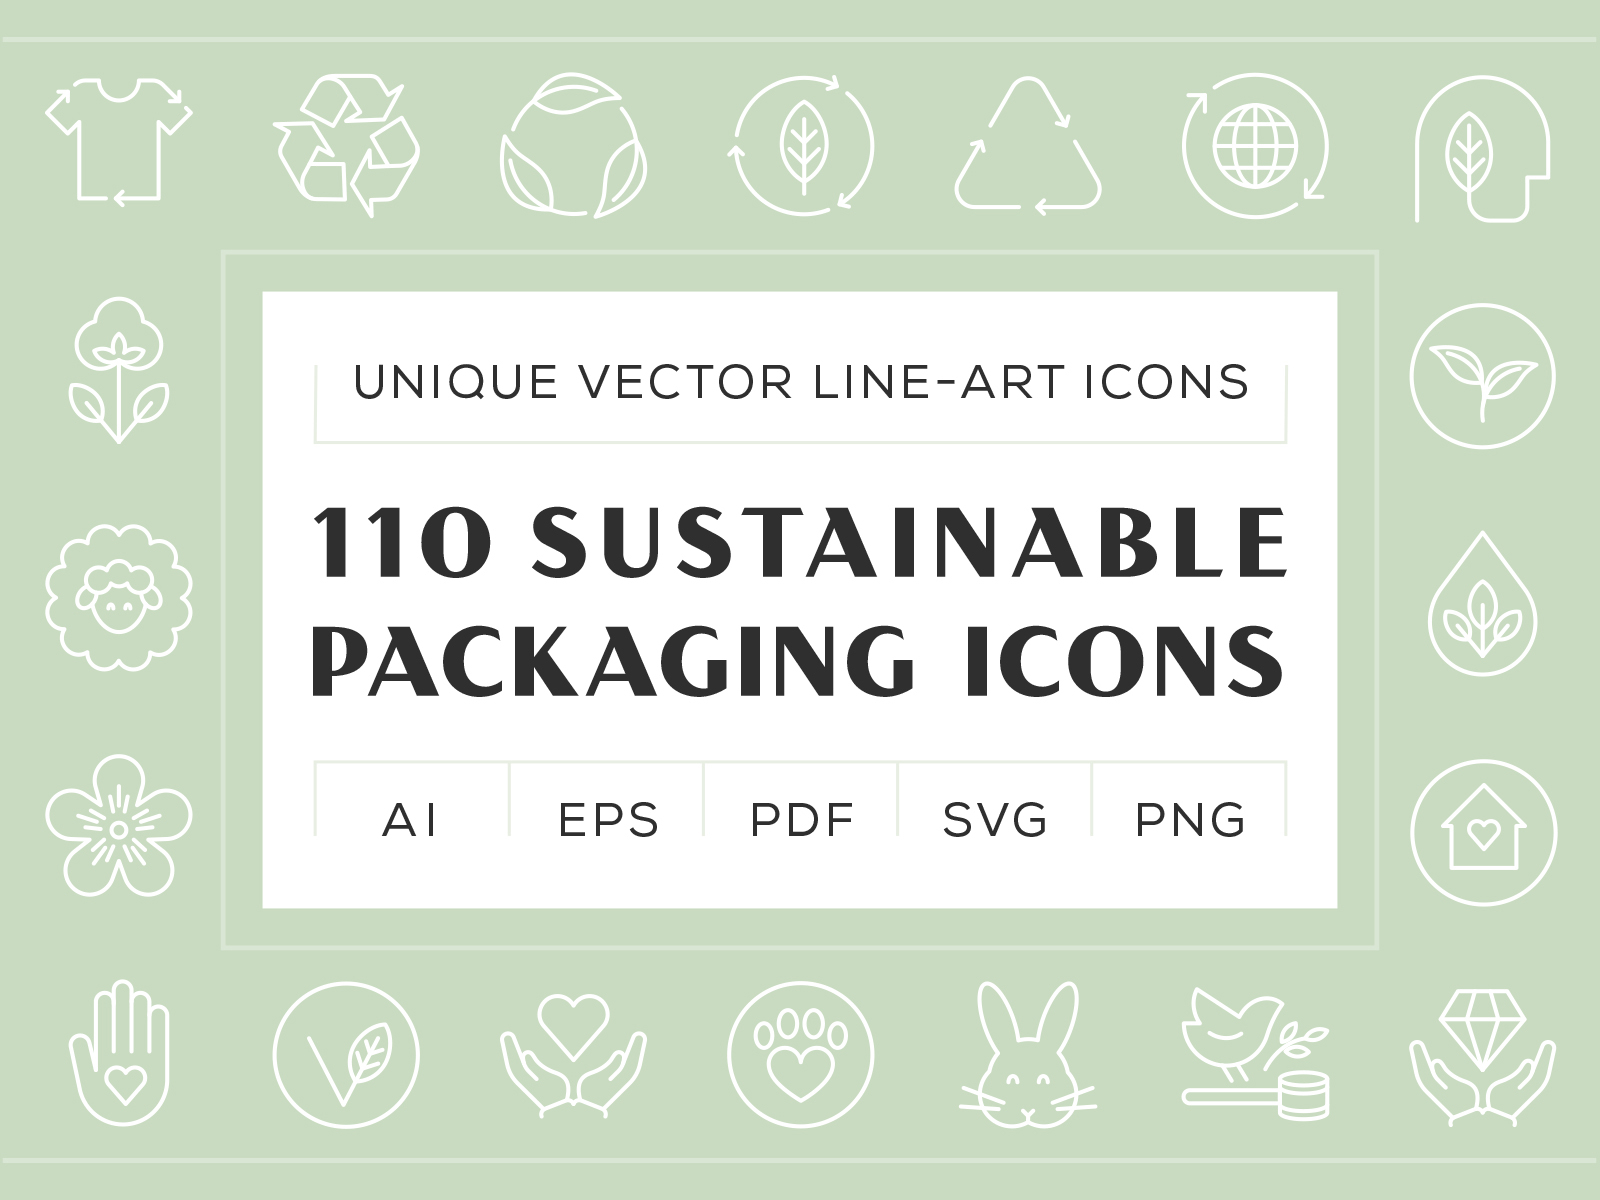 Sustainable Packaging Icons bundle cosmetics diet nutrition digital product editable food icons icon design icon set iconography icons iconset illustrator line art organic natural cosmetics packaging purchase sales sustainable vector vegan eco green